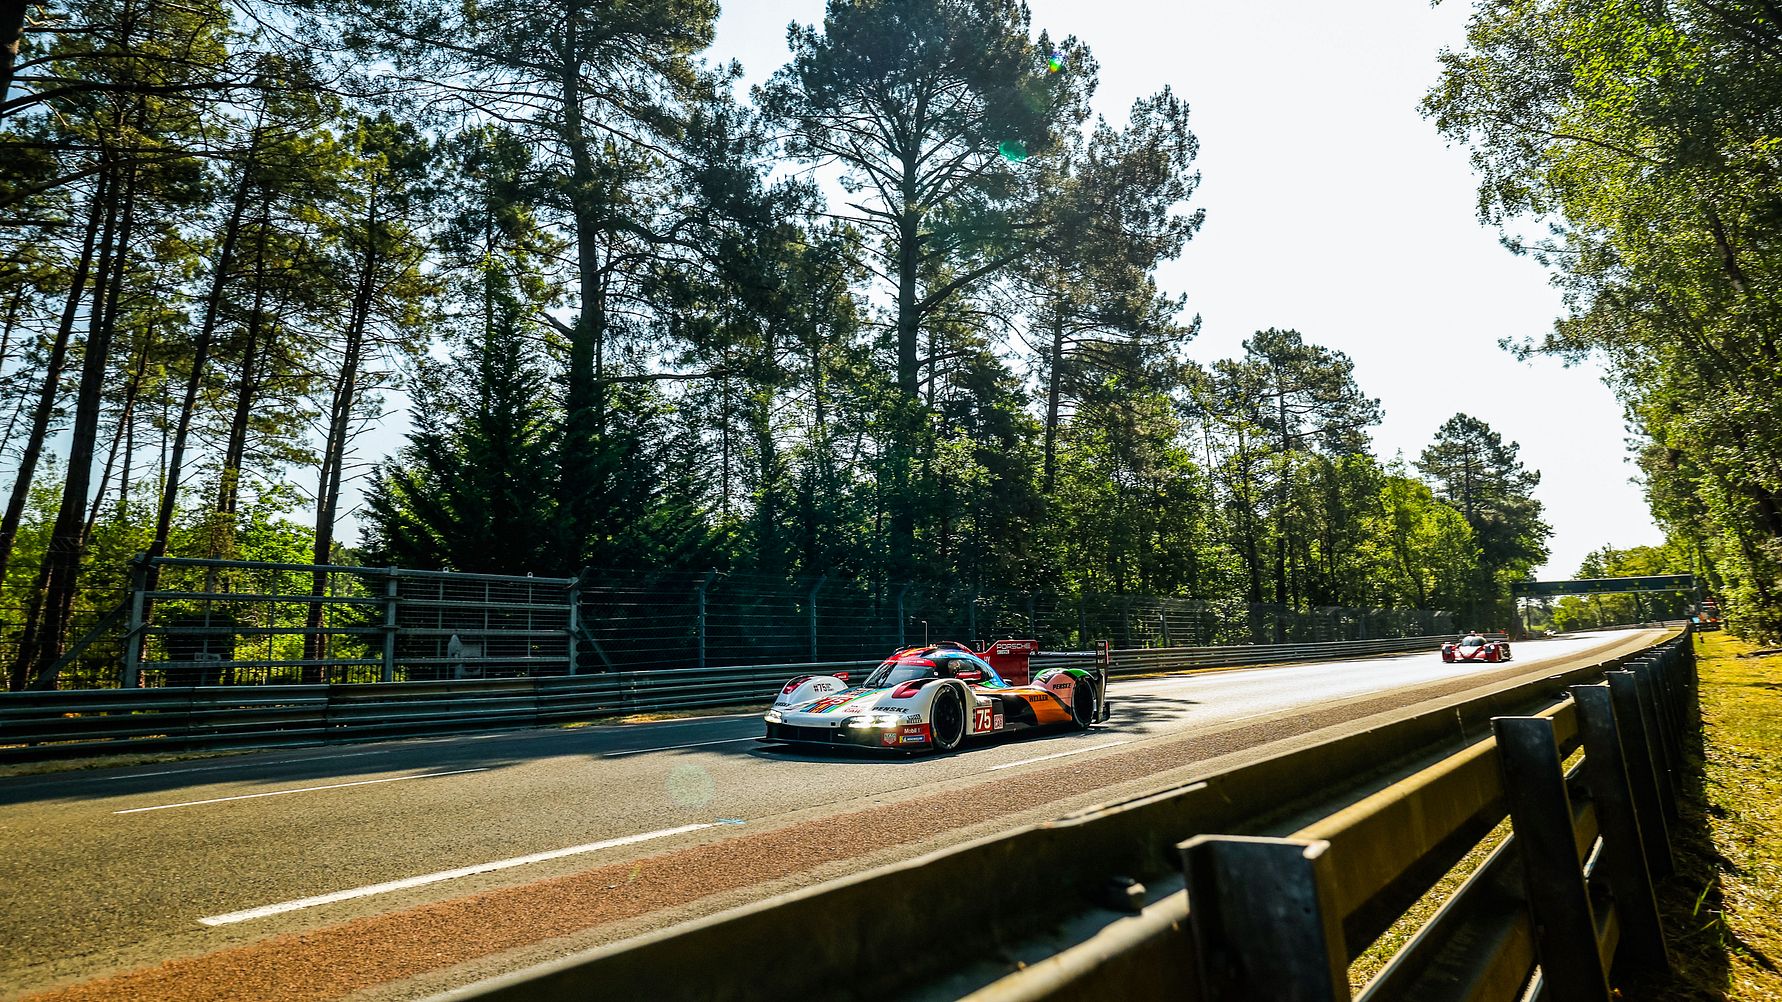 Porsche is aiming for another victory at Le Mans